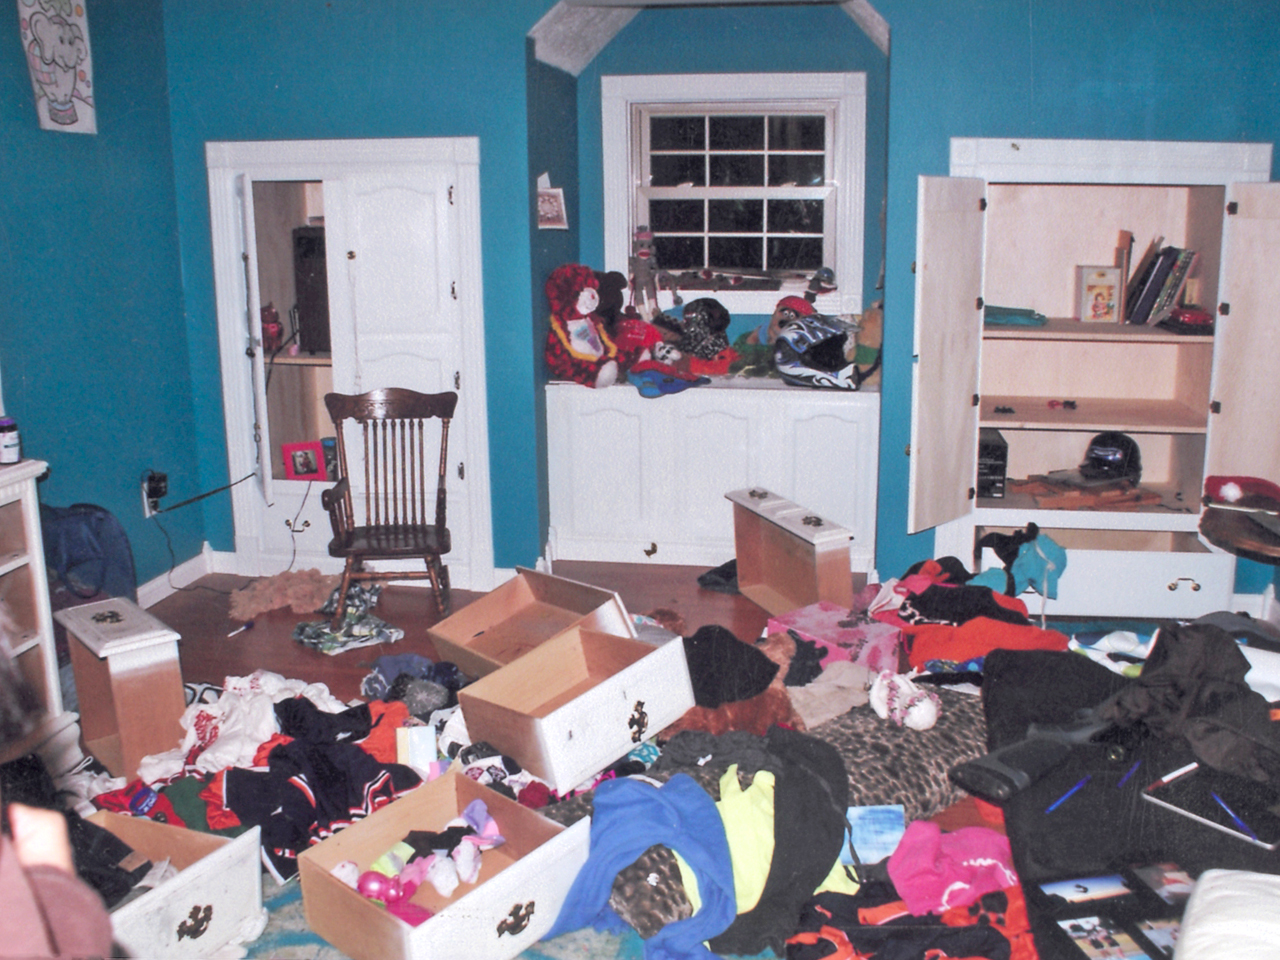 Thieves ransack homes of families attending funerals - TODAY.com